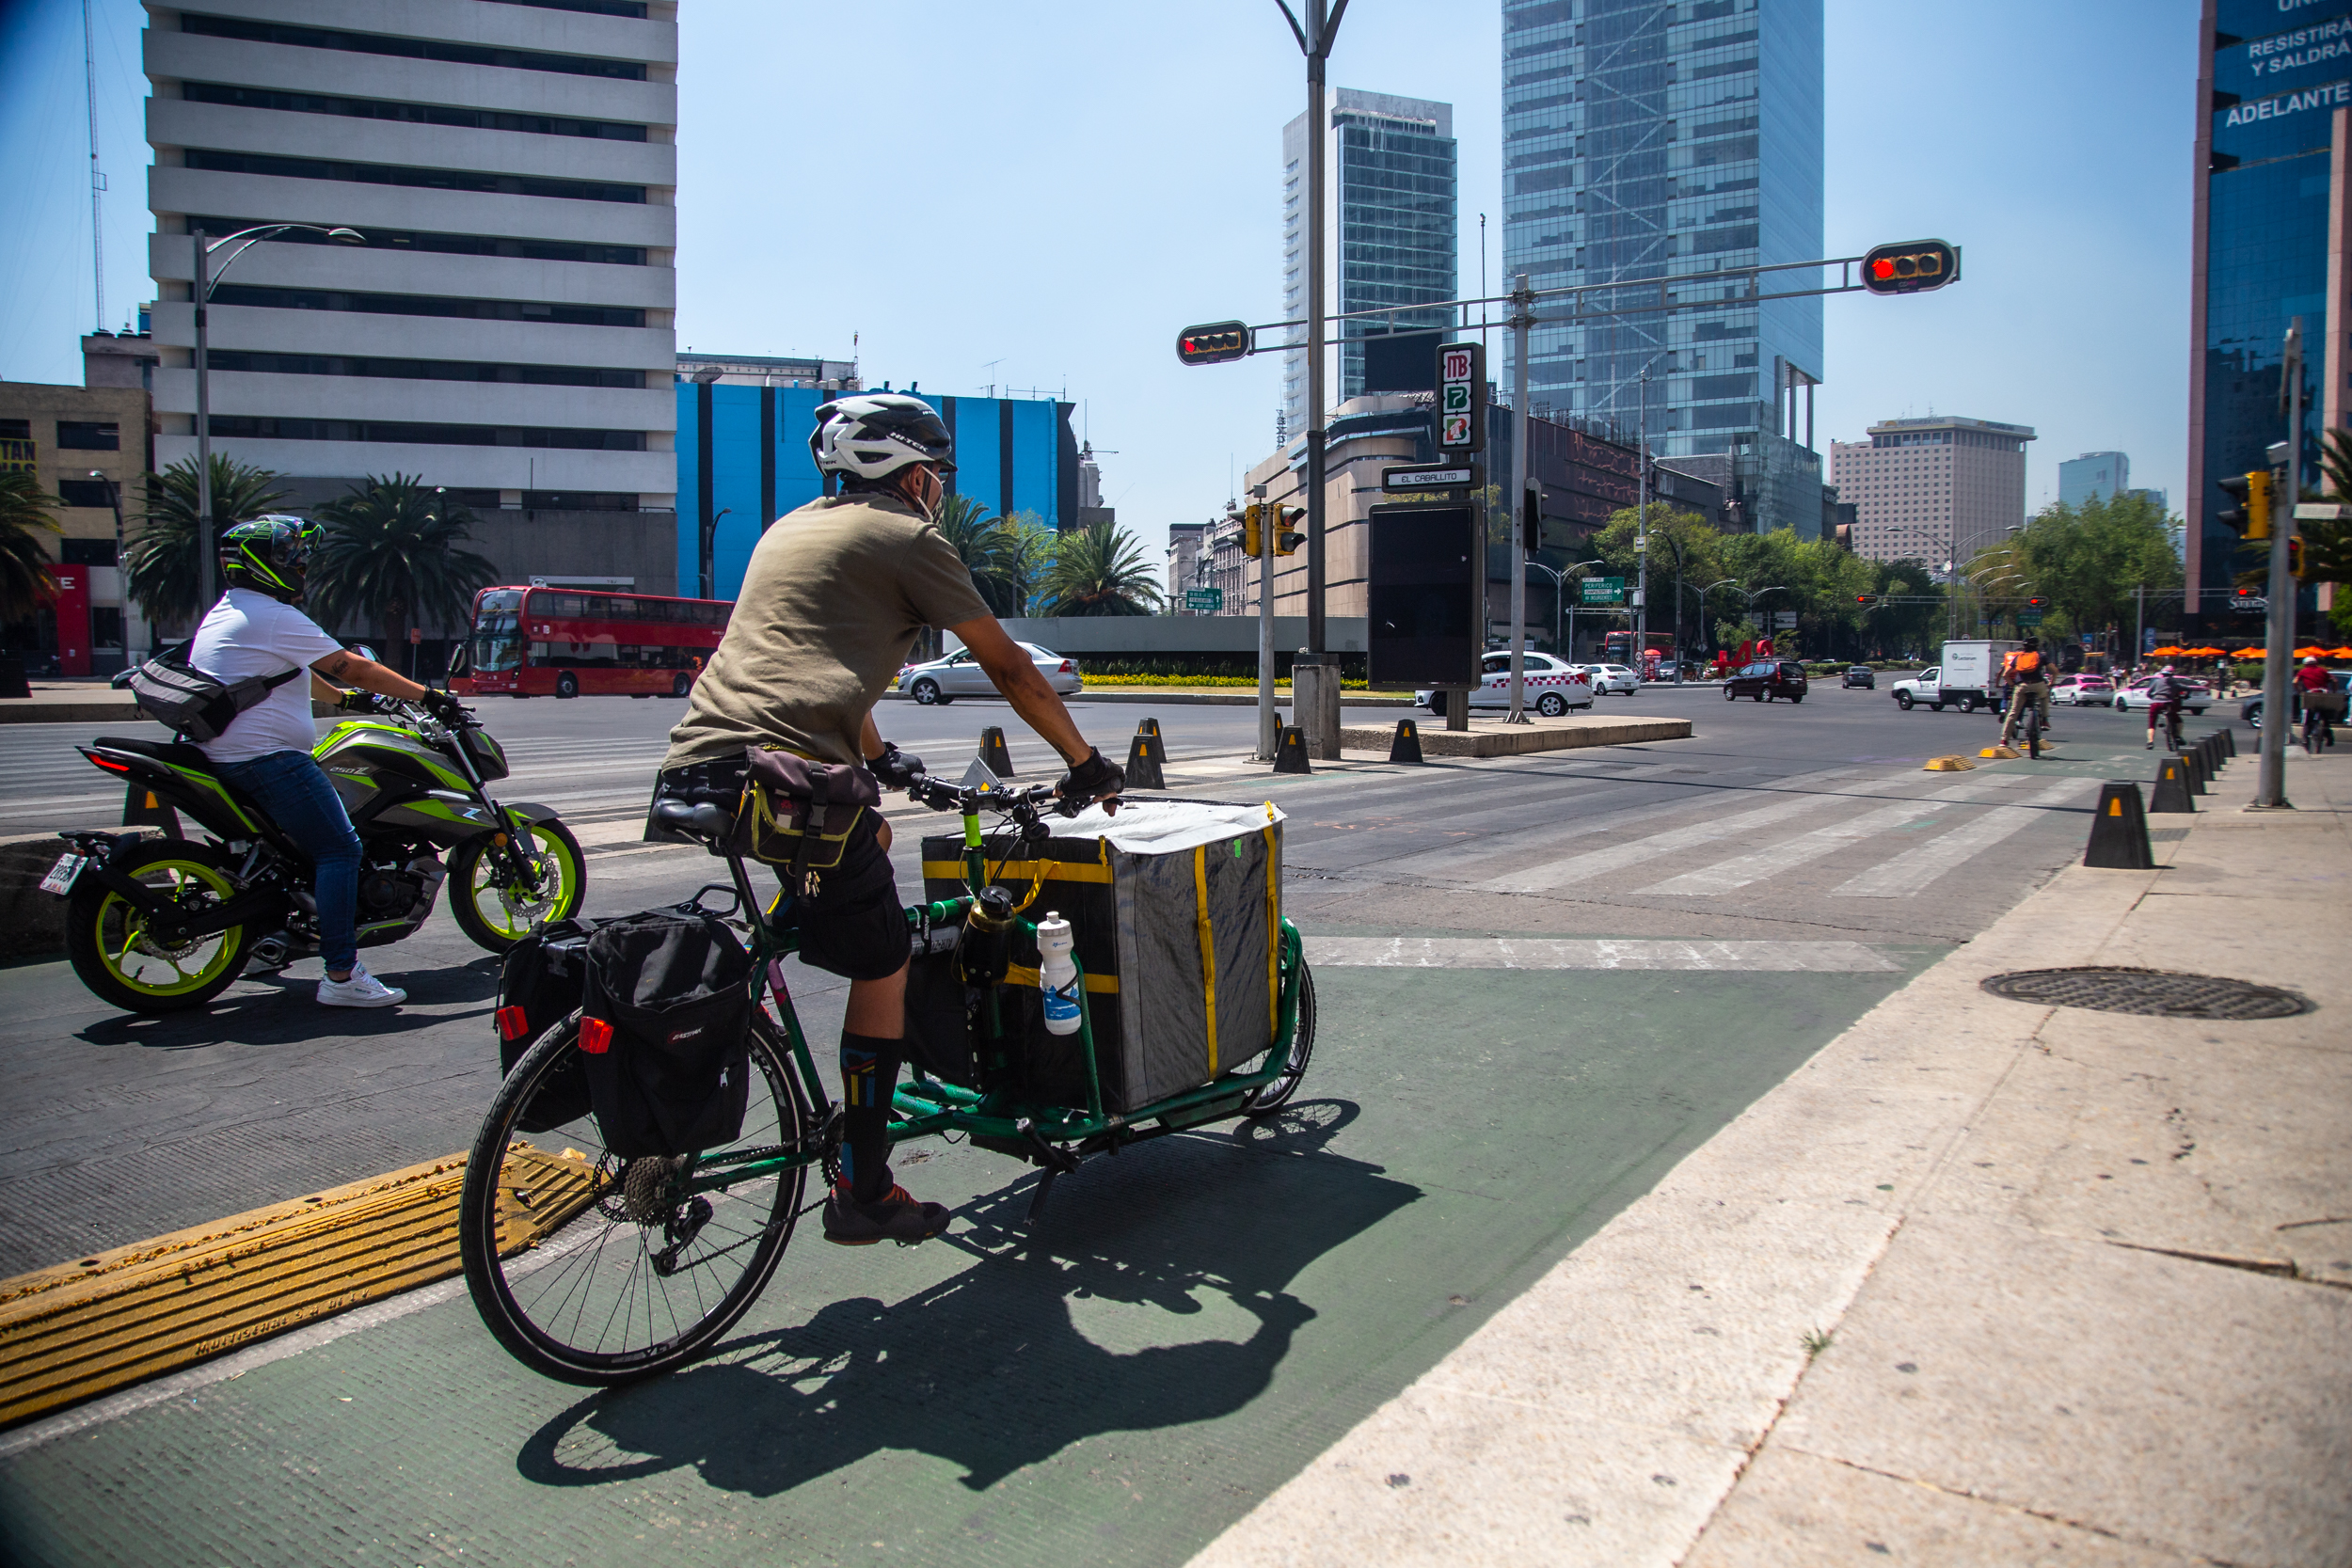 Mexico's Ideamos Program Shows Bicycles Are Moving More than People